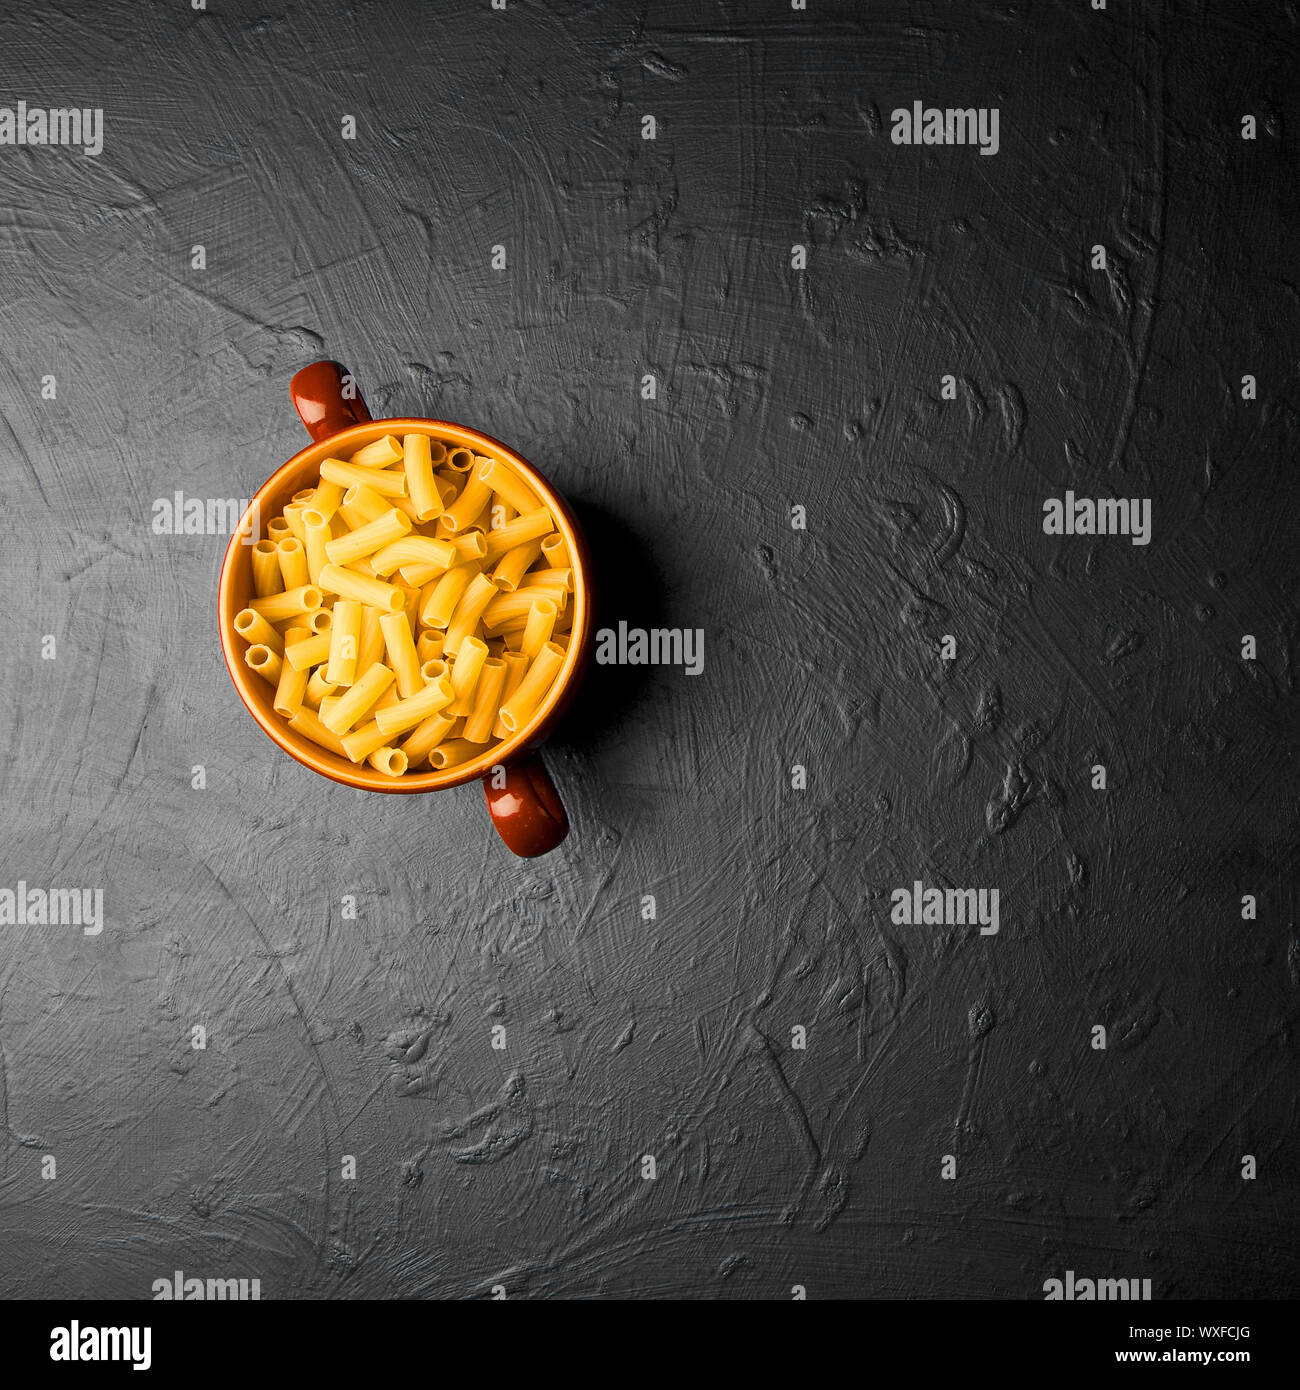 PASTA IN A PLATE ON A DARK BACKGROUND. YELLOW MACARONES IN CLAY BEAM ON DARK RELIEF BACKGROUND. Stock Photo